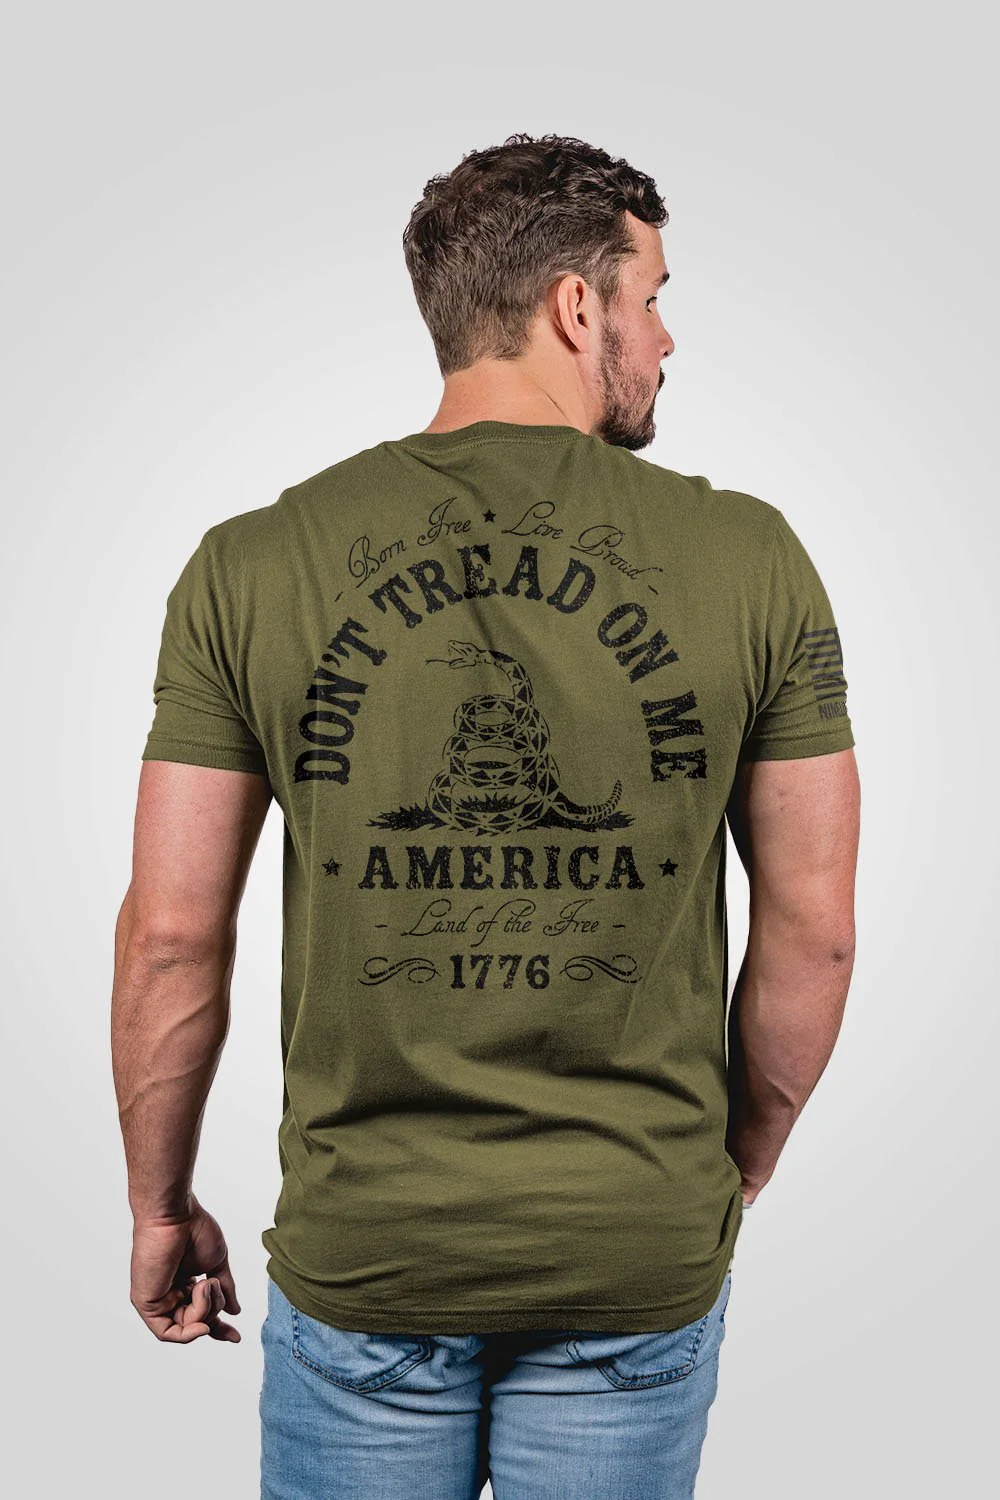 Nine Line Men's Don't Tread On Me T-Shirt posted by ProdOrigin USA in Men's Apparel